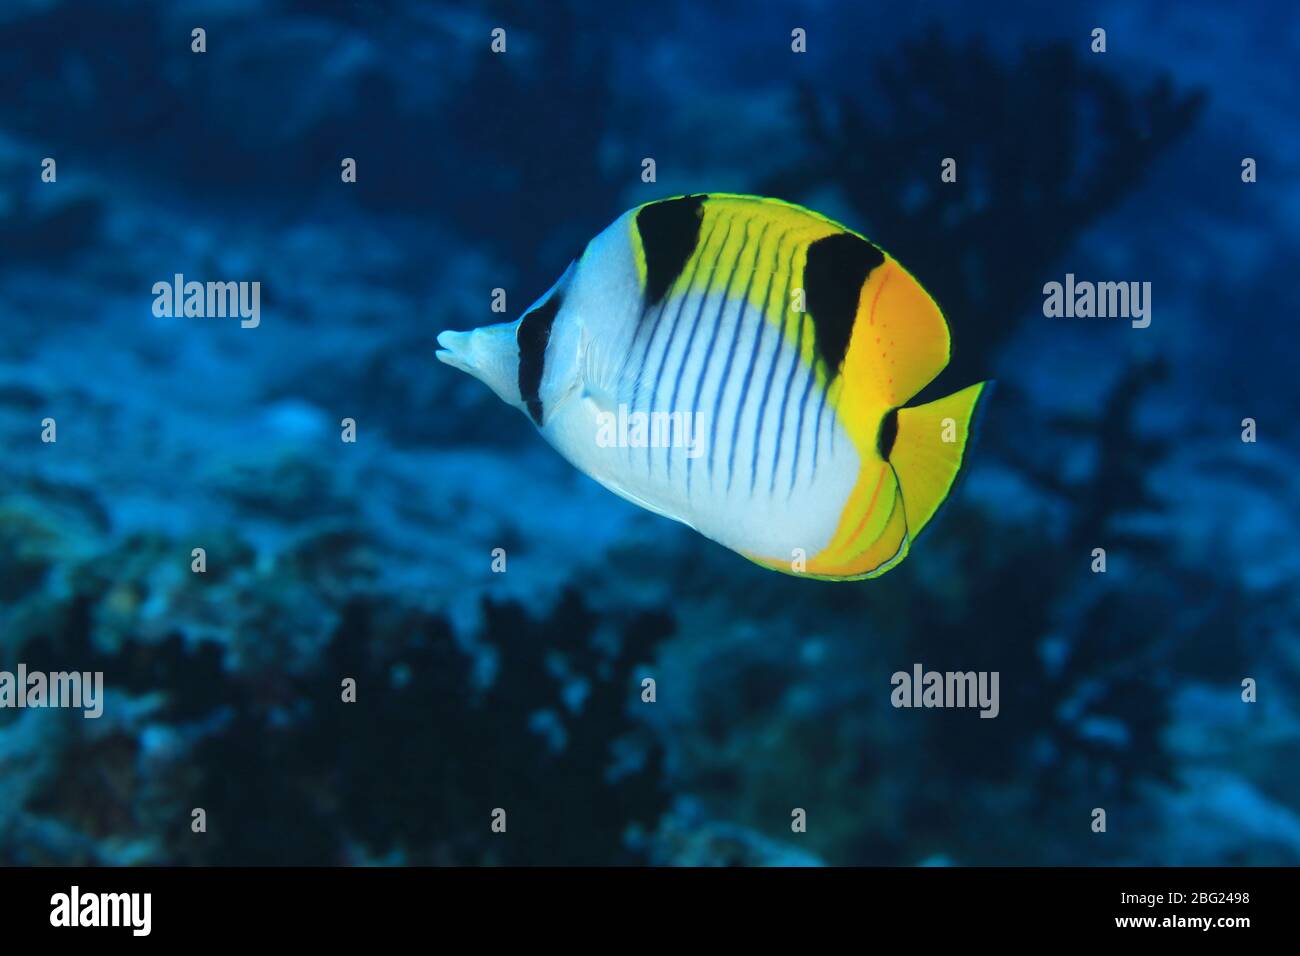 Blackwedged butterflyfish (Chaetodon falcula) underwater in the tropical coral reef of the Indian Ocean Stock Photo